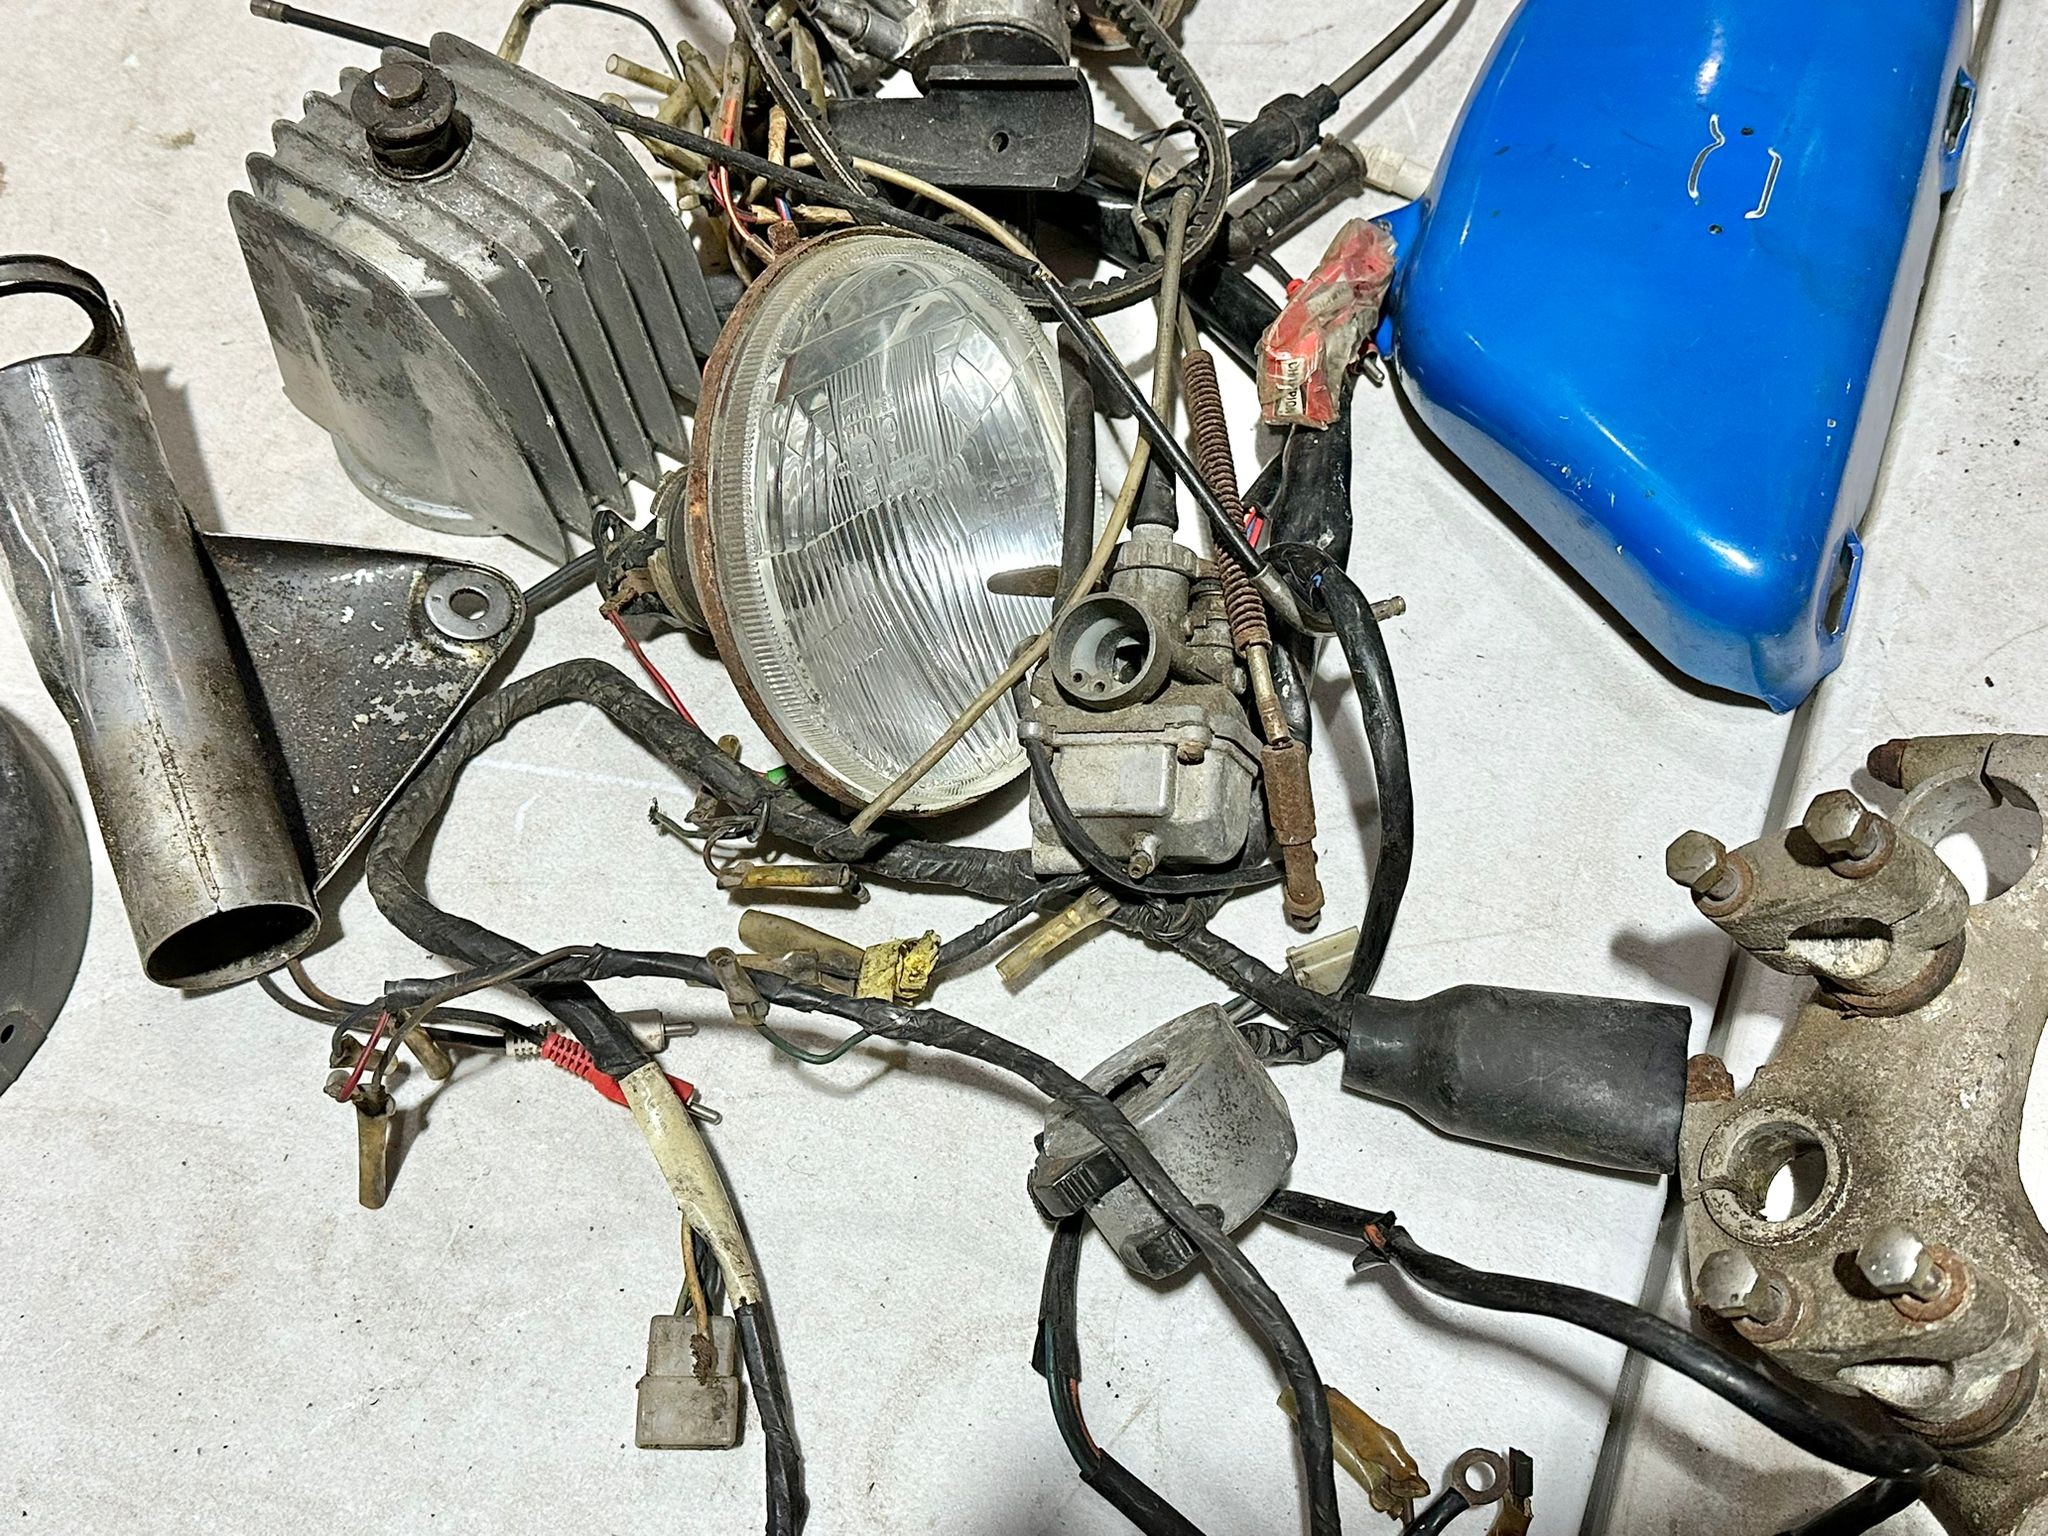 Kawasaki S1 250 White Ghost 2 stroke Frame 1972, with parts, engine and documents - Image 26 of 28